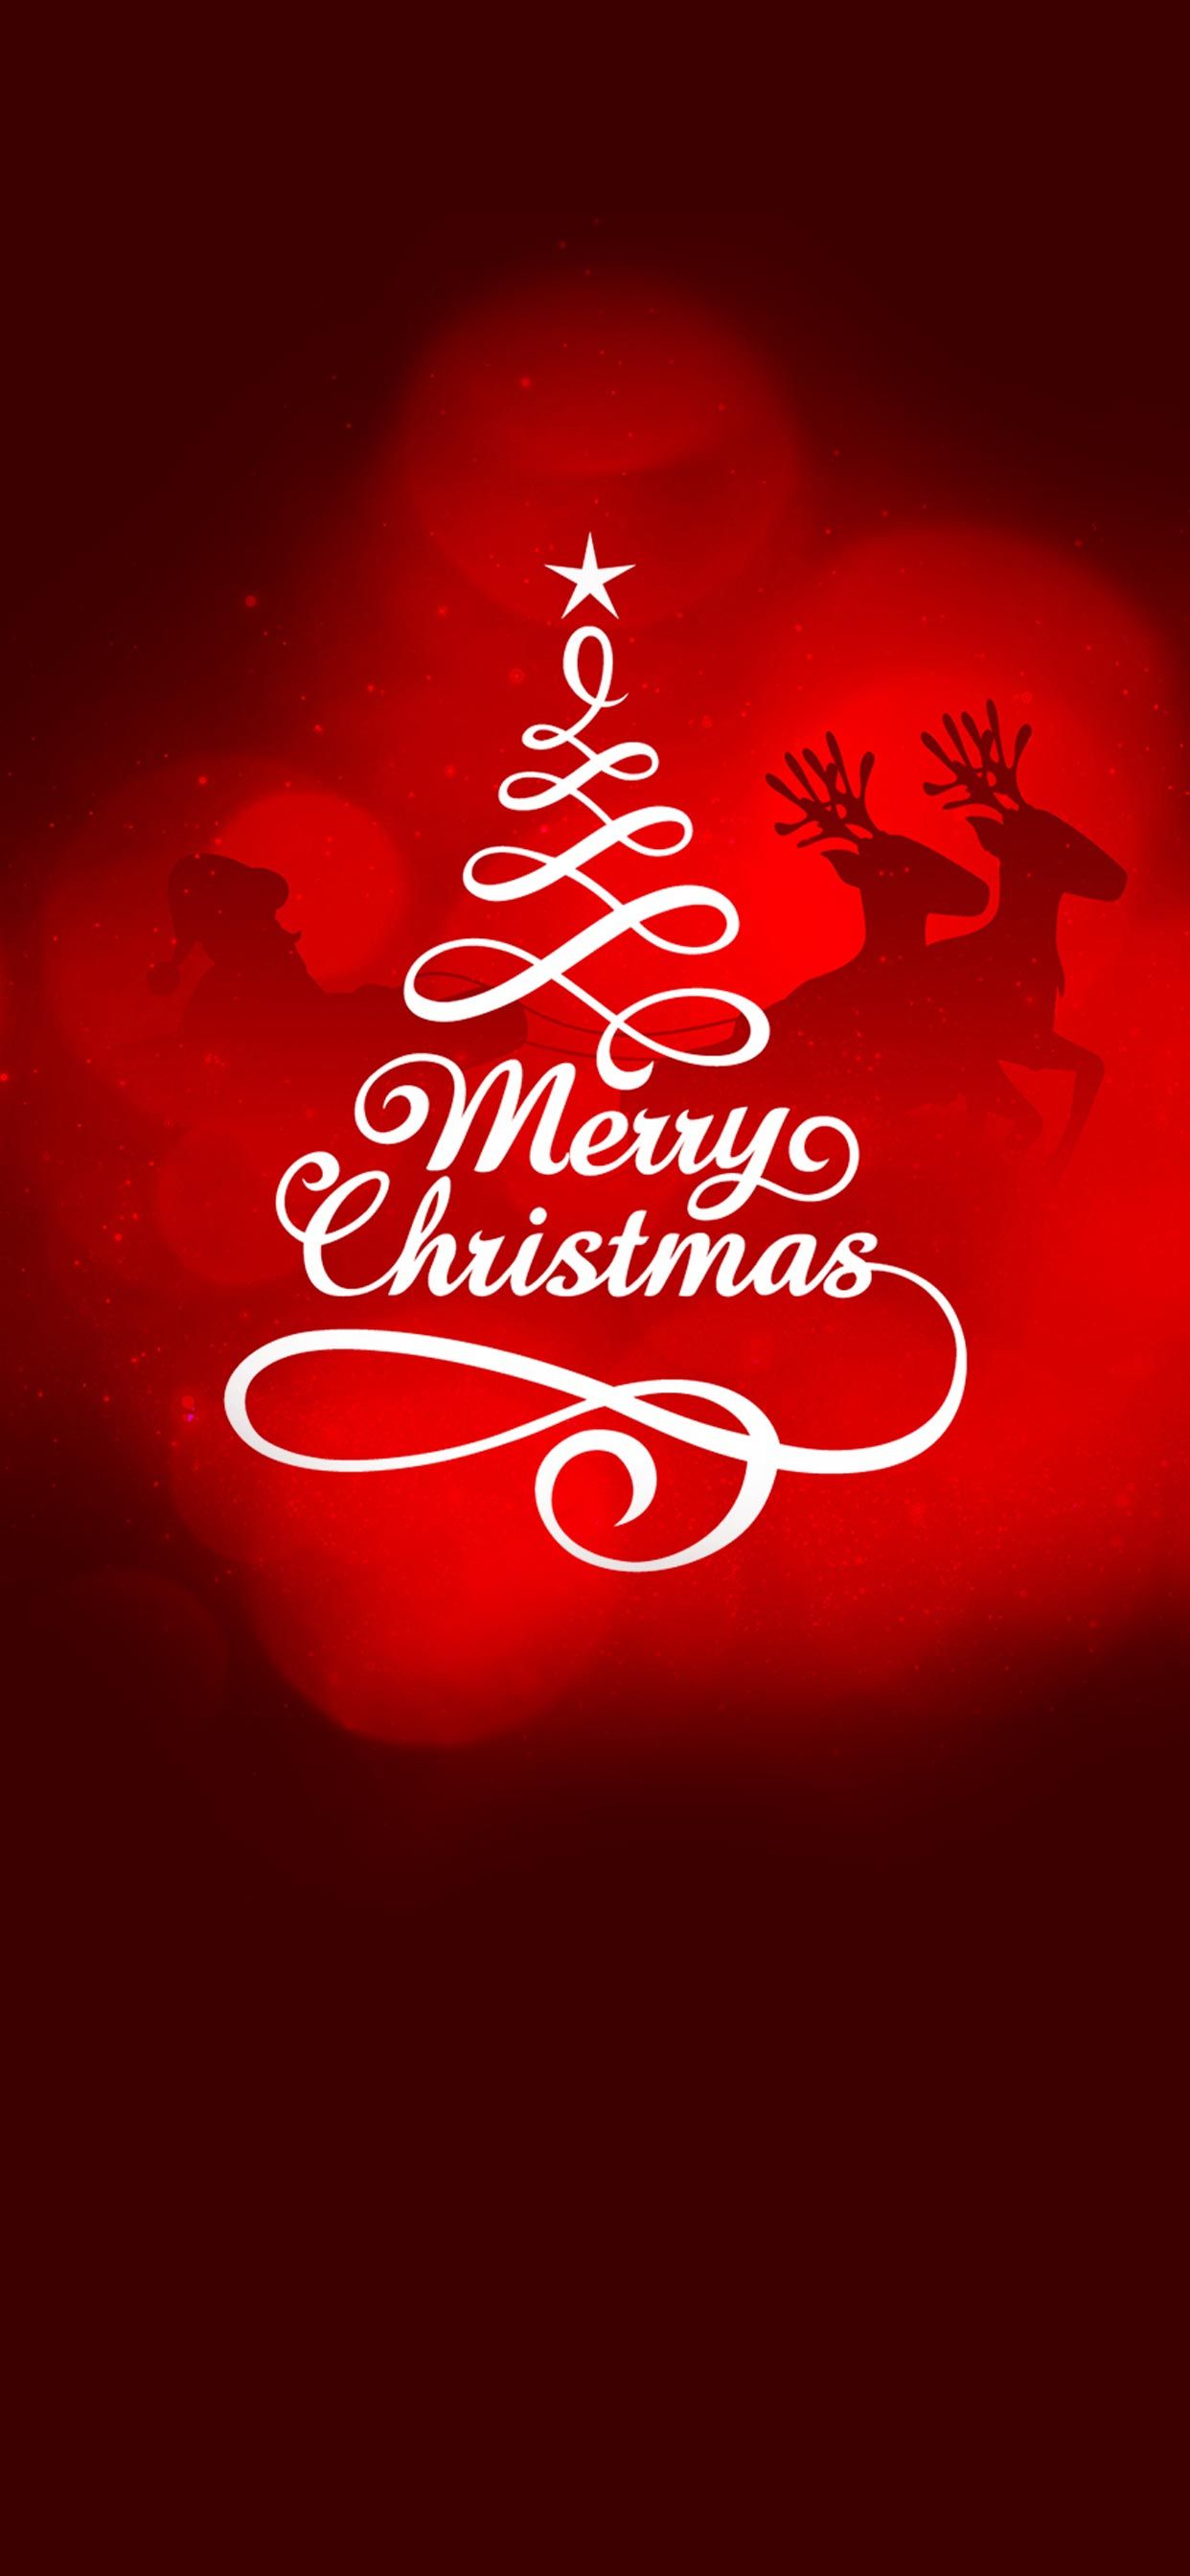 Merry Christmas iPhone Wallpaper, HD Merry Christmas iPhone Background on WallpaperBat